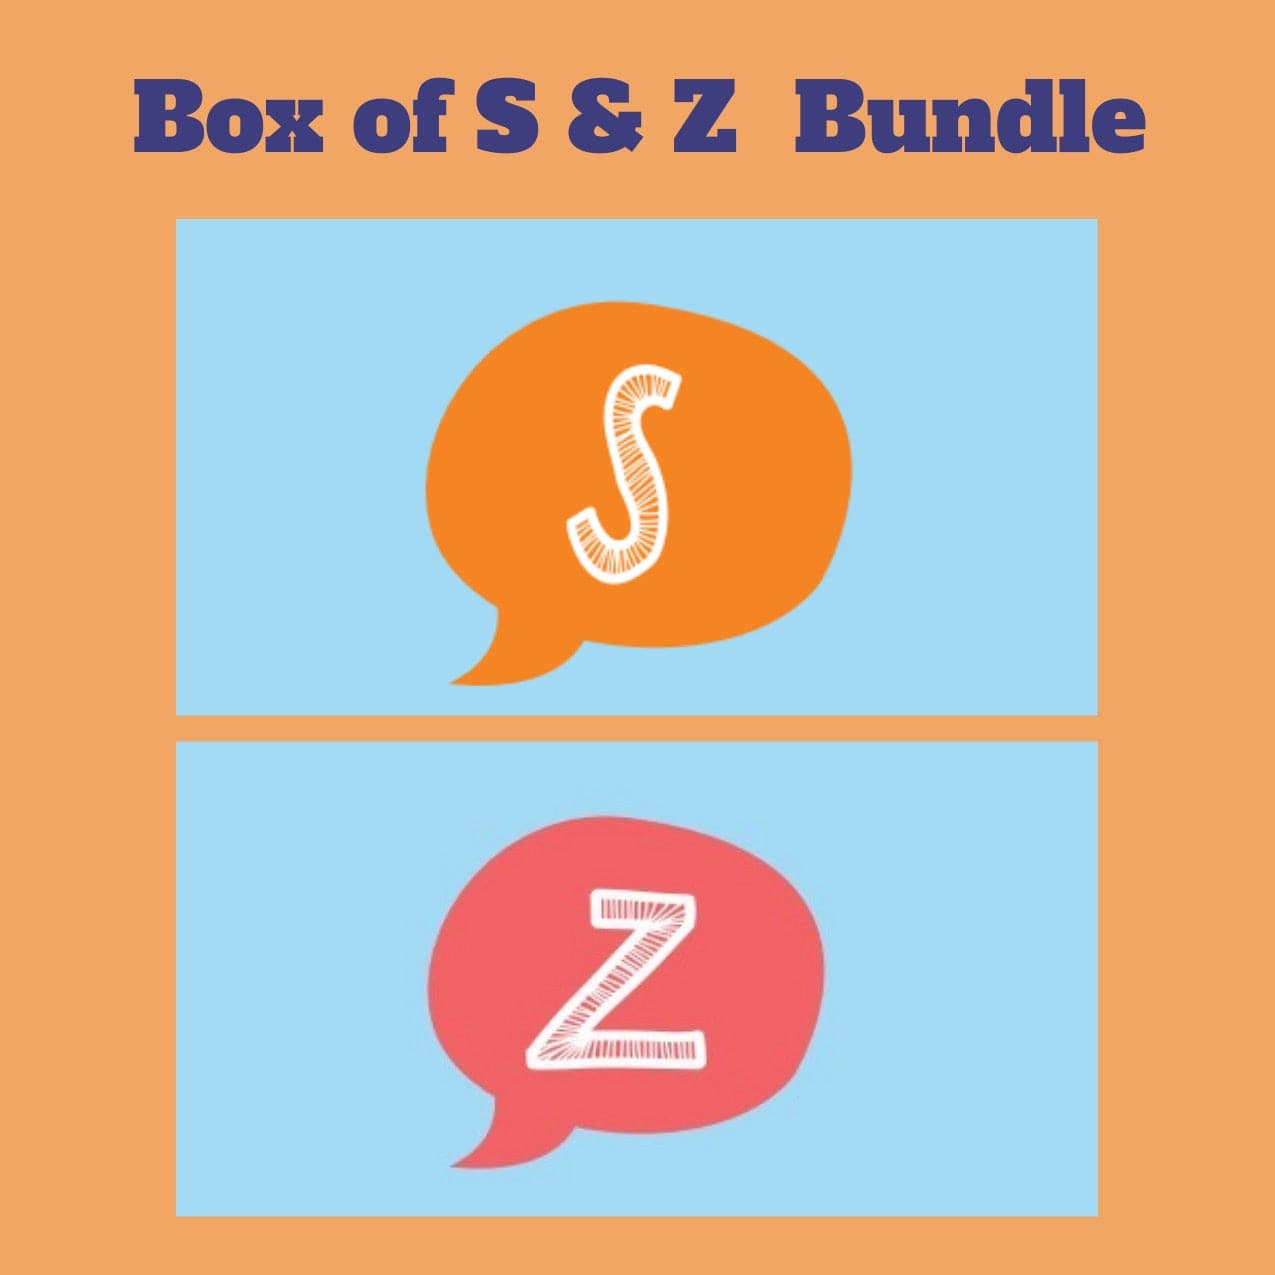 [title]Box of S and Z Bundle